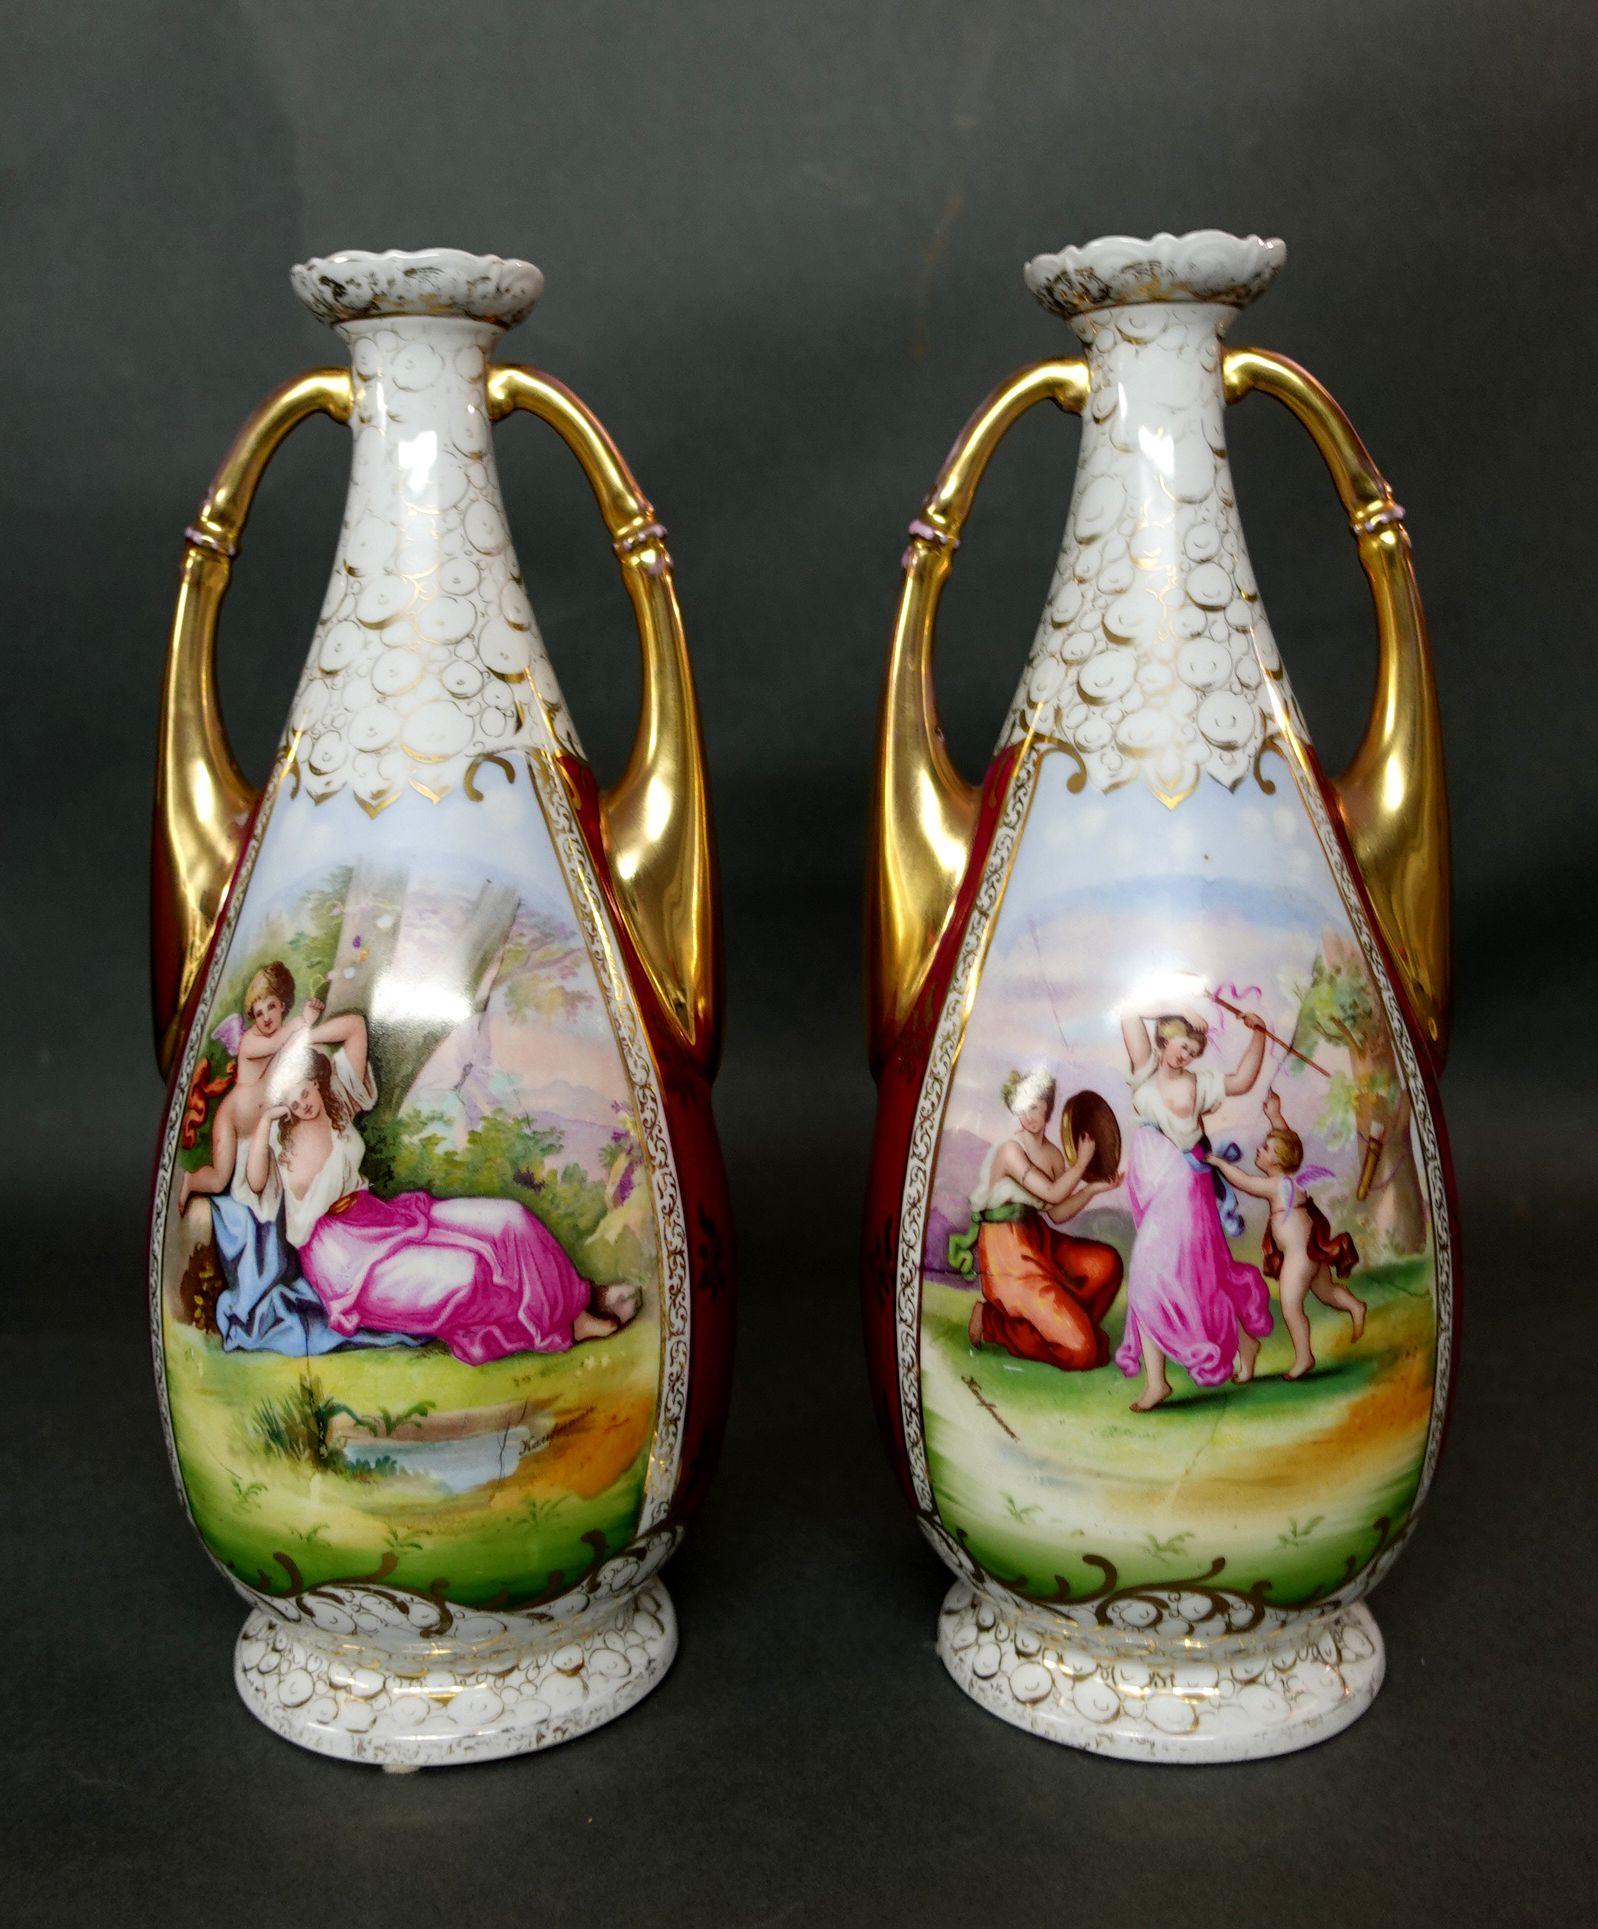 Comprising a pair of matching vases with amorous scenes and gilt handles. Two large paintings on each vase and a total of 4 paintings. Measure: Height 14 inches.
  